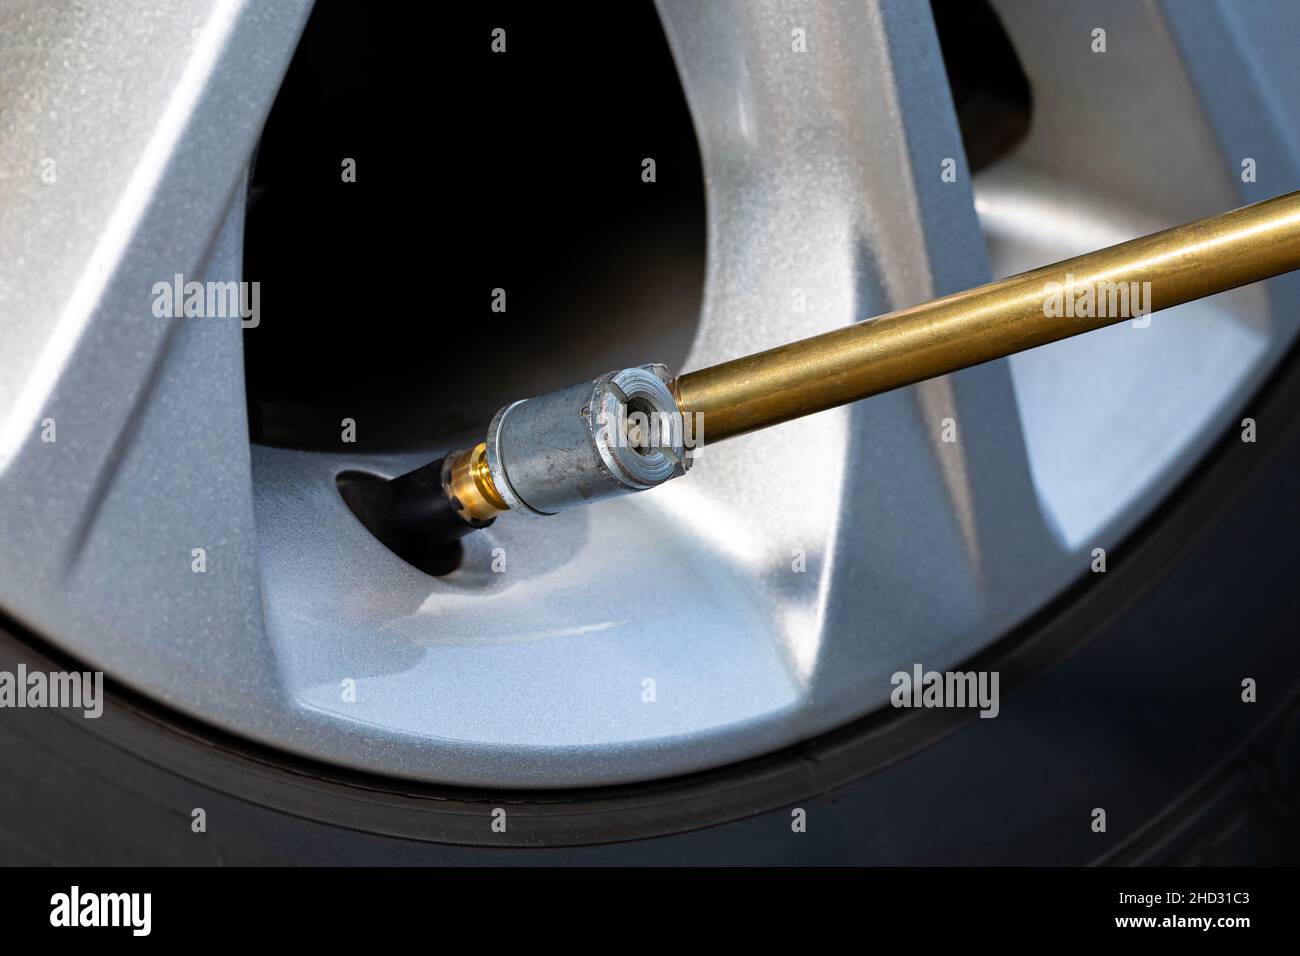 Air chuck on tire valve stem inflating car tire. Vehicle safety, tire wear, fuel mileage and winter checkup concept. Stock Photo